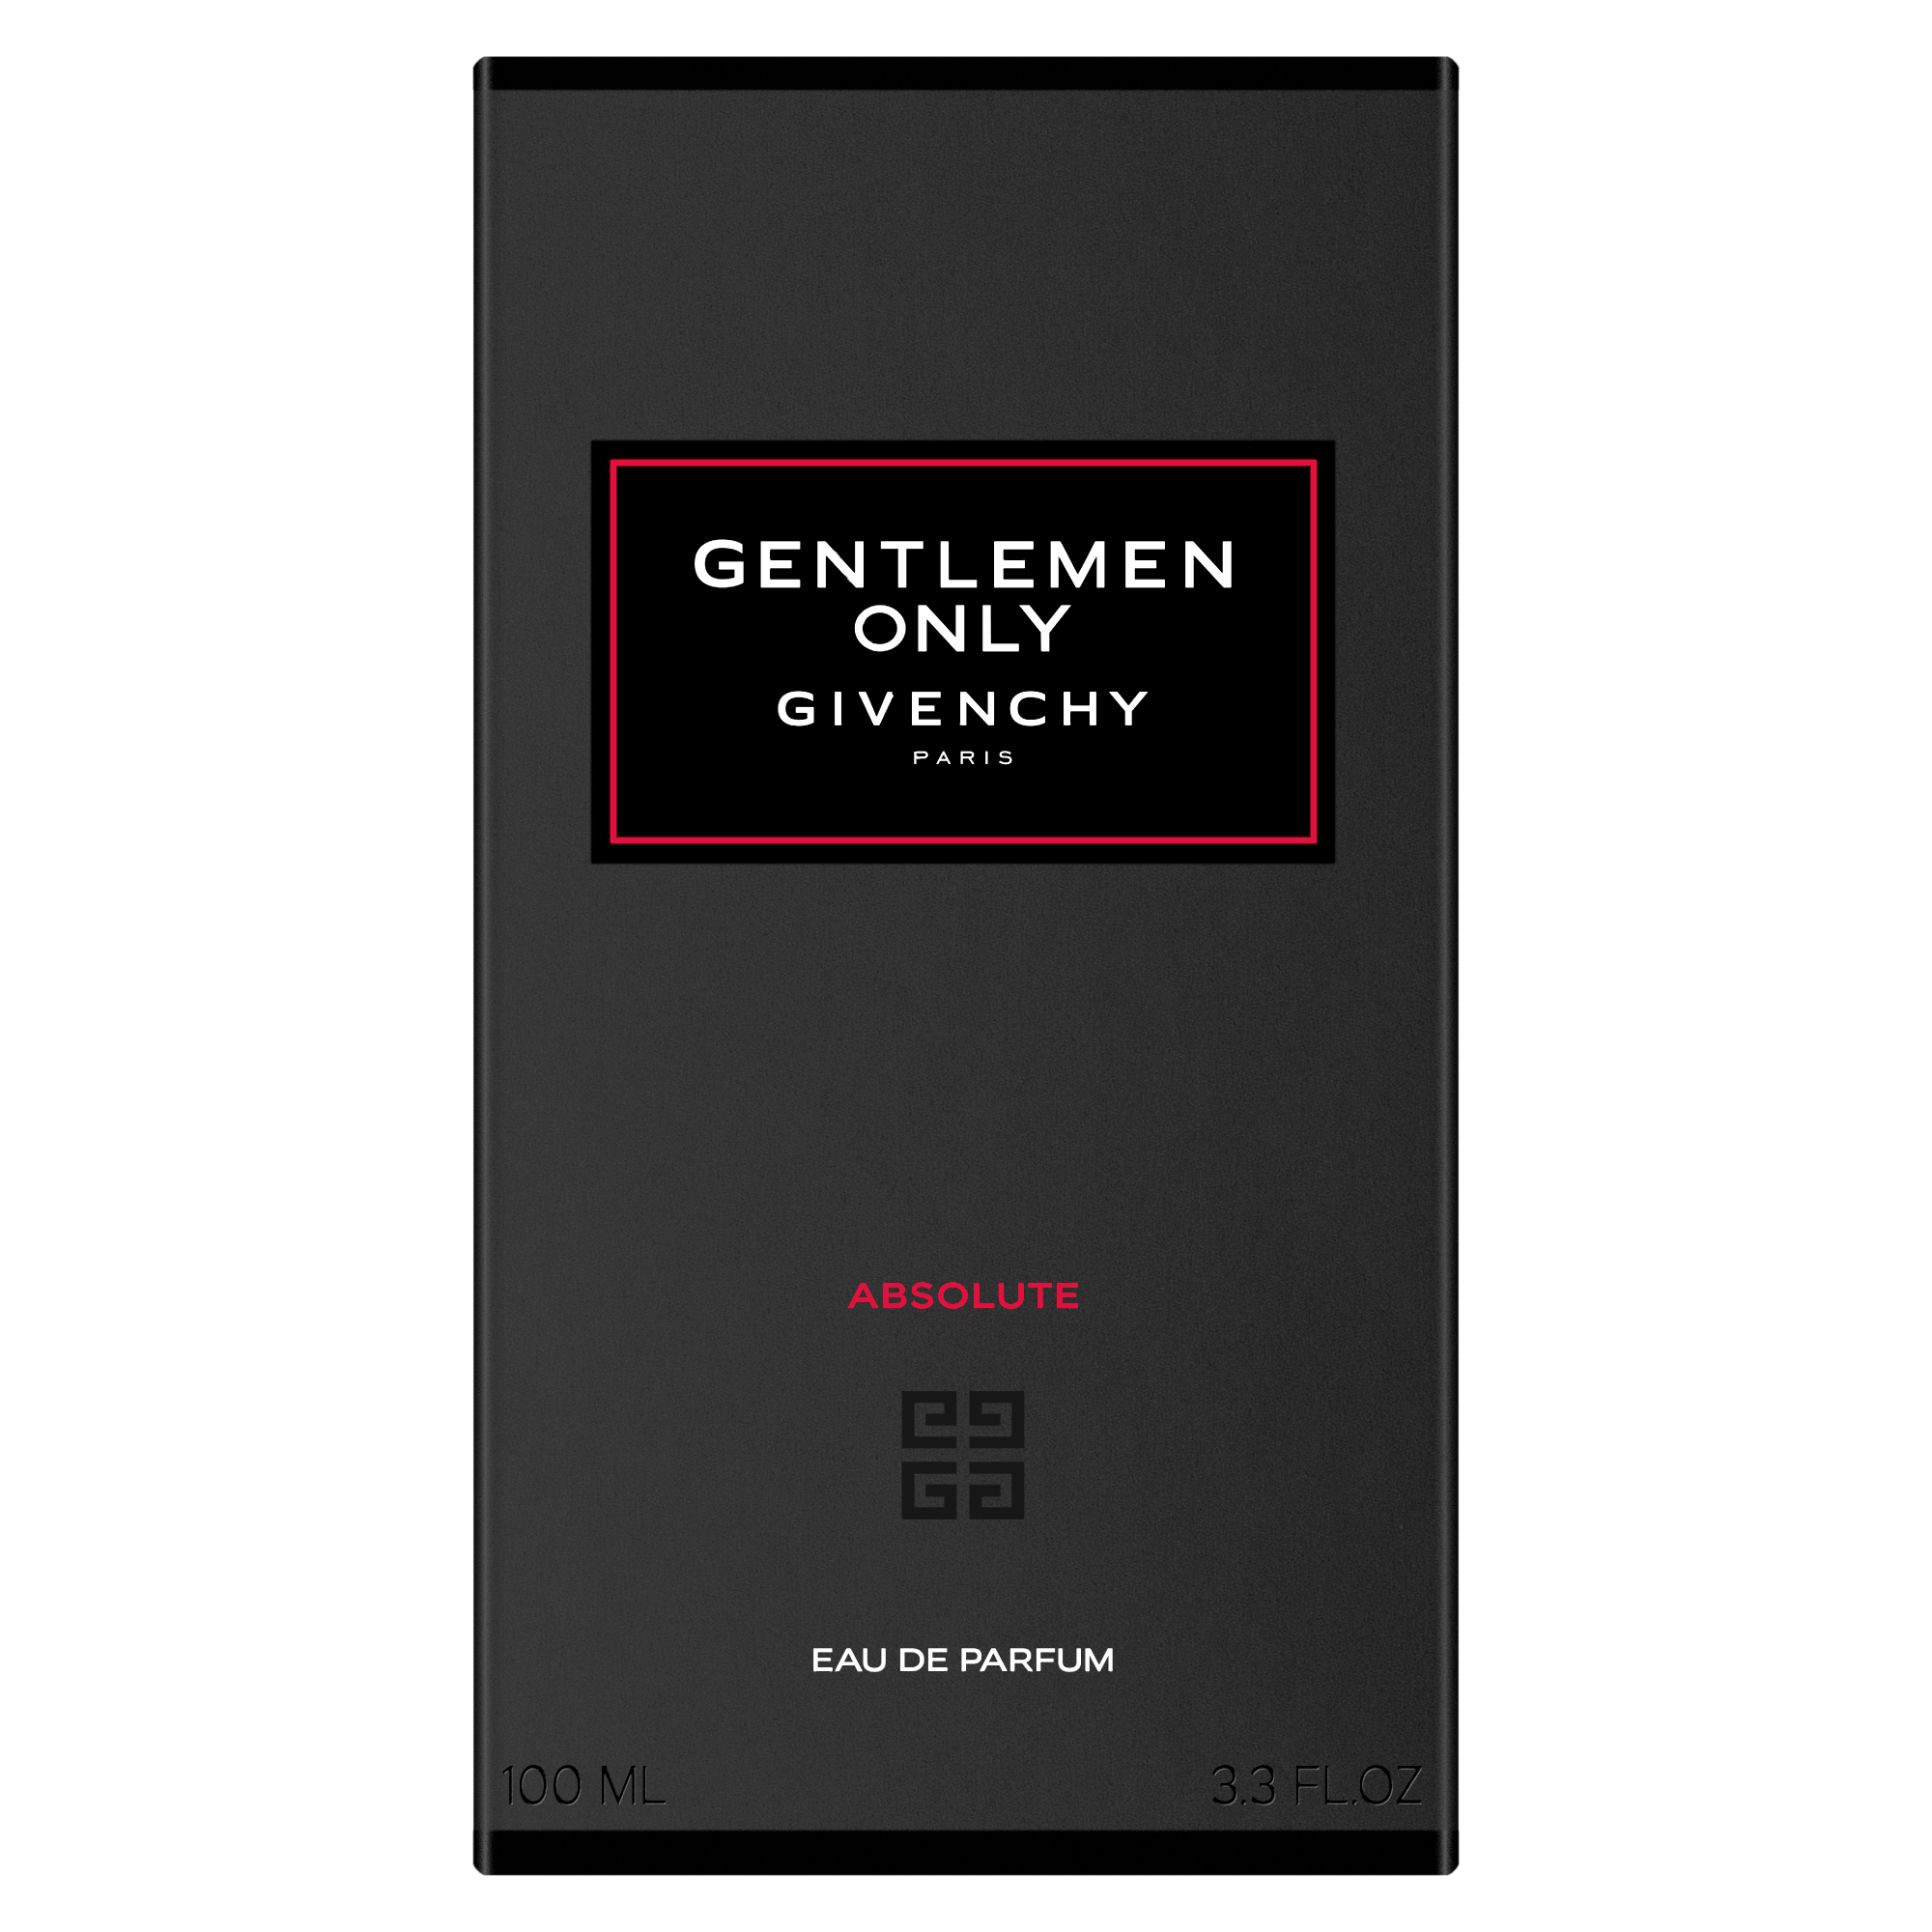 Givenchy only absolute. Givenchy Gentlemen only absolute,100ml. Живанши Абсолют женские. Givenchy absolutely.